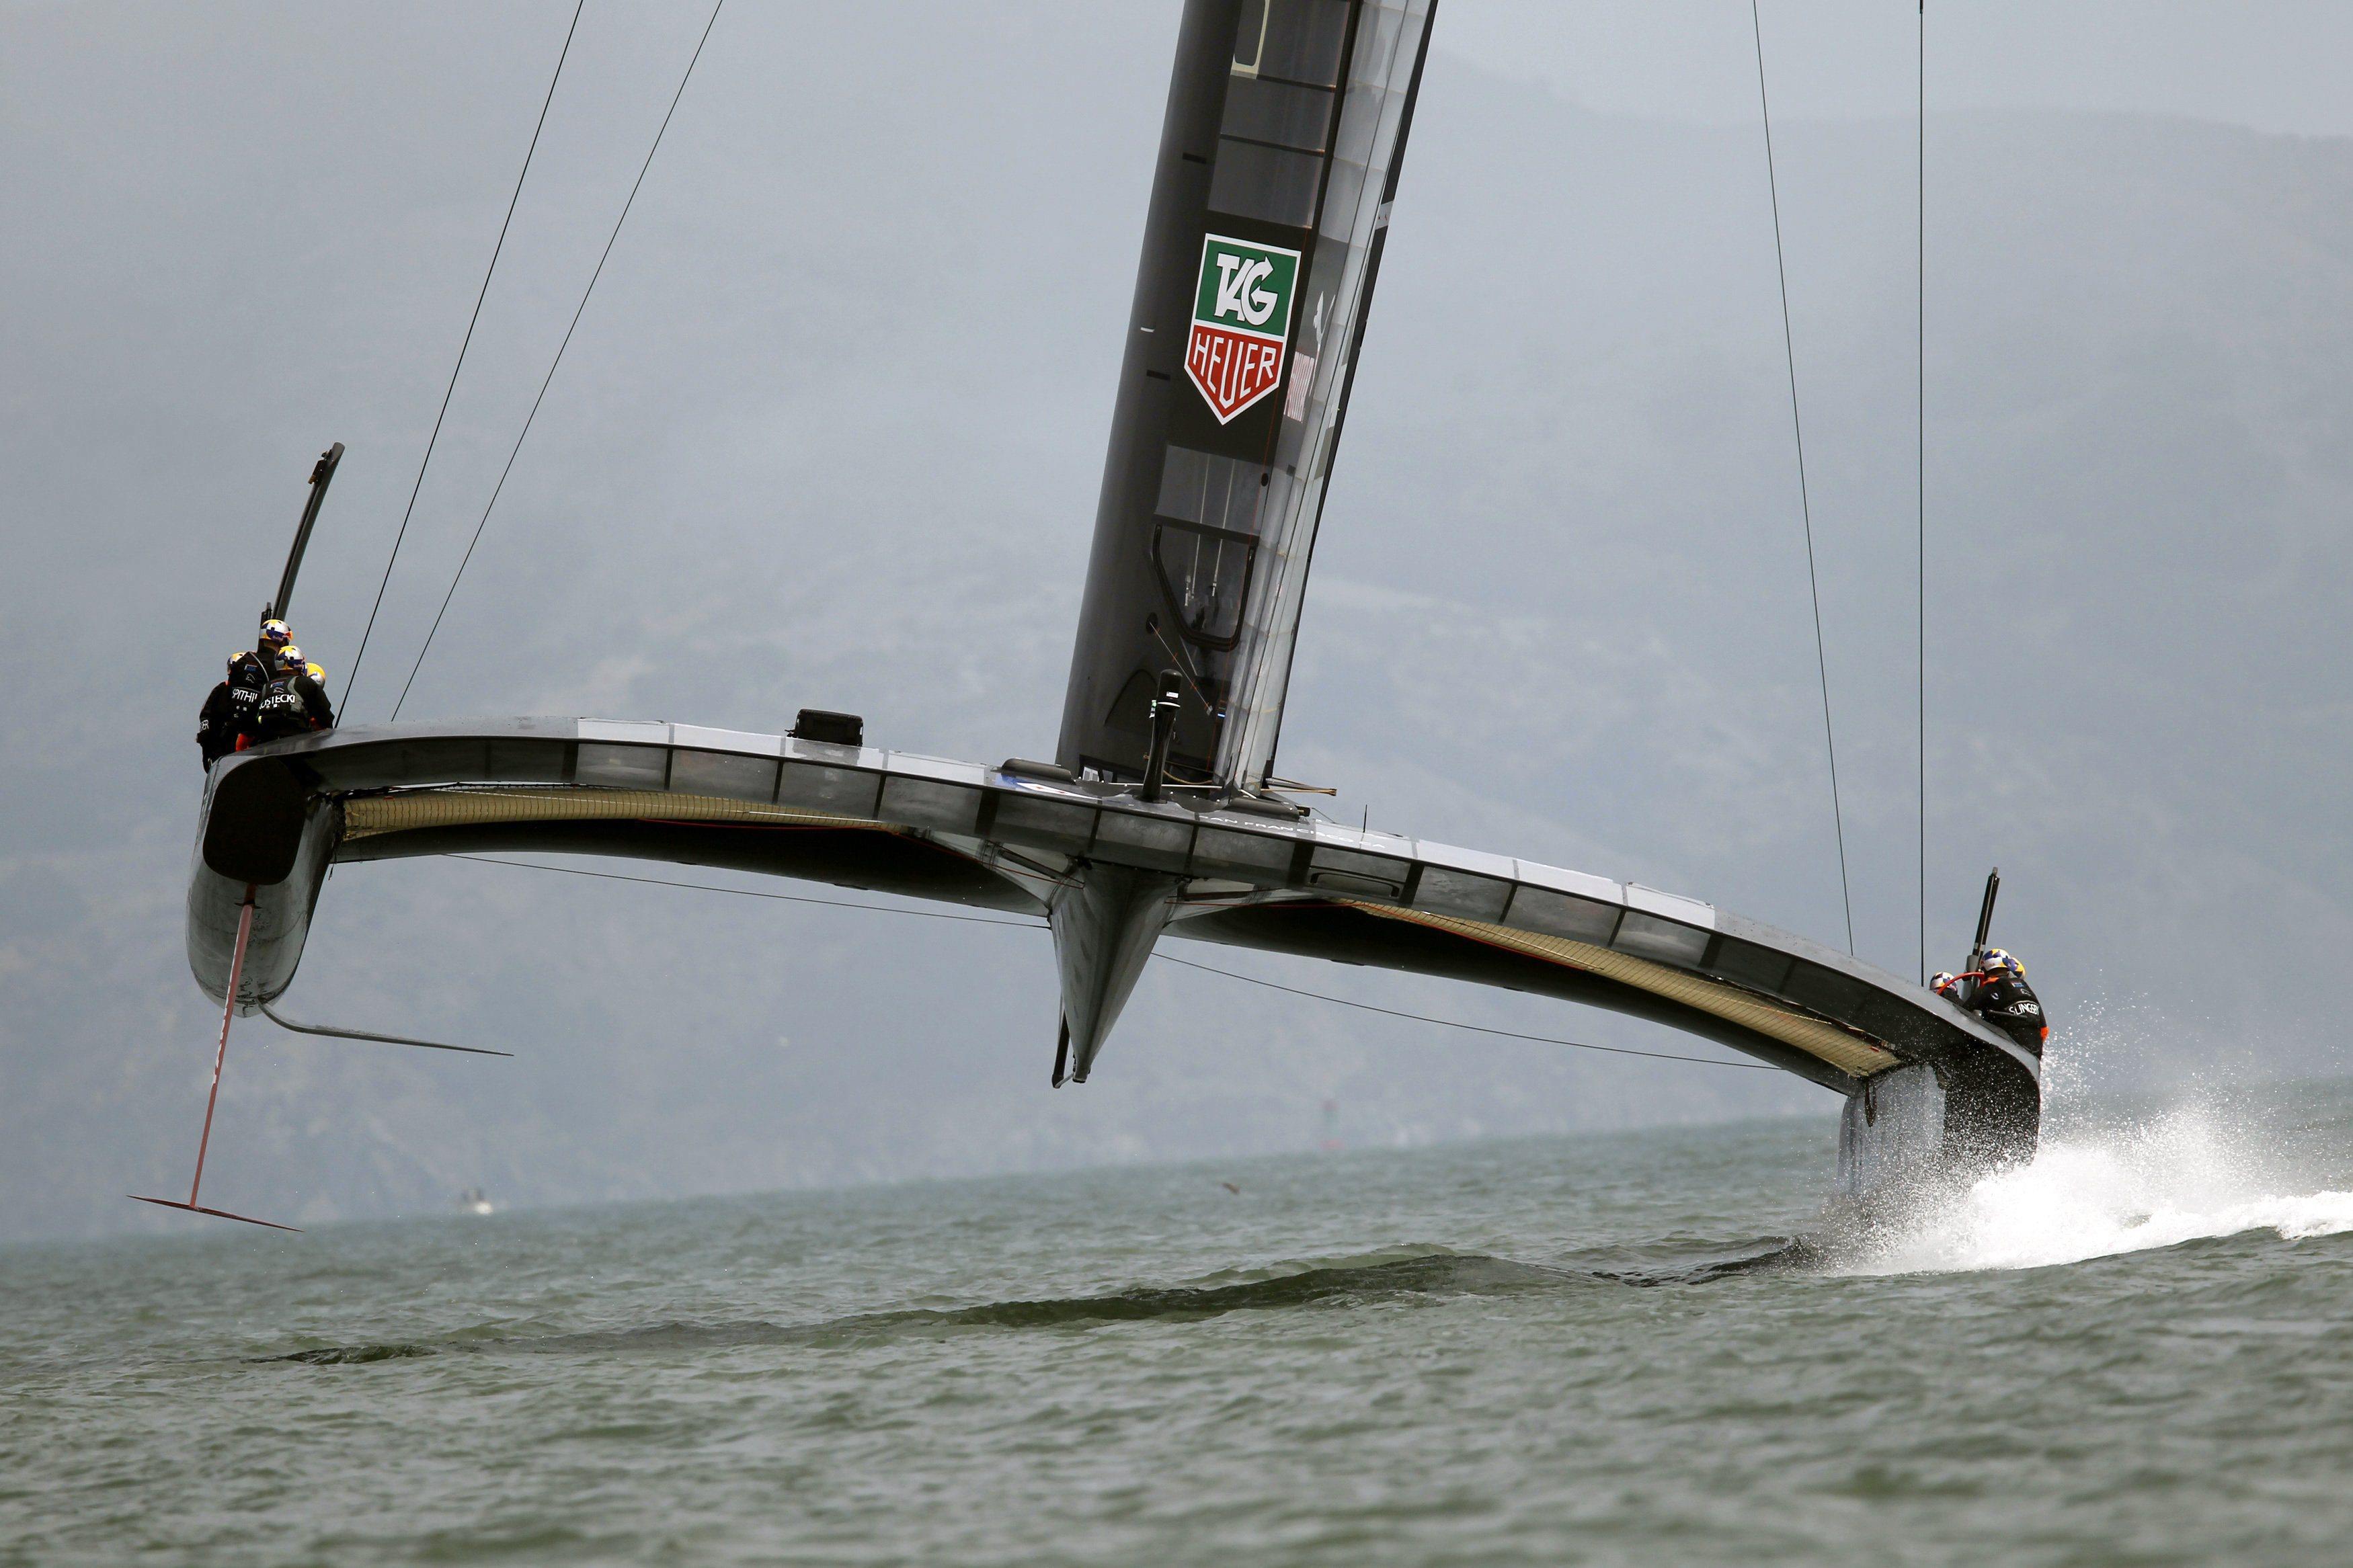 SAILING-AMERICASCUP/